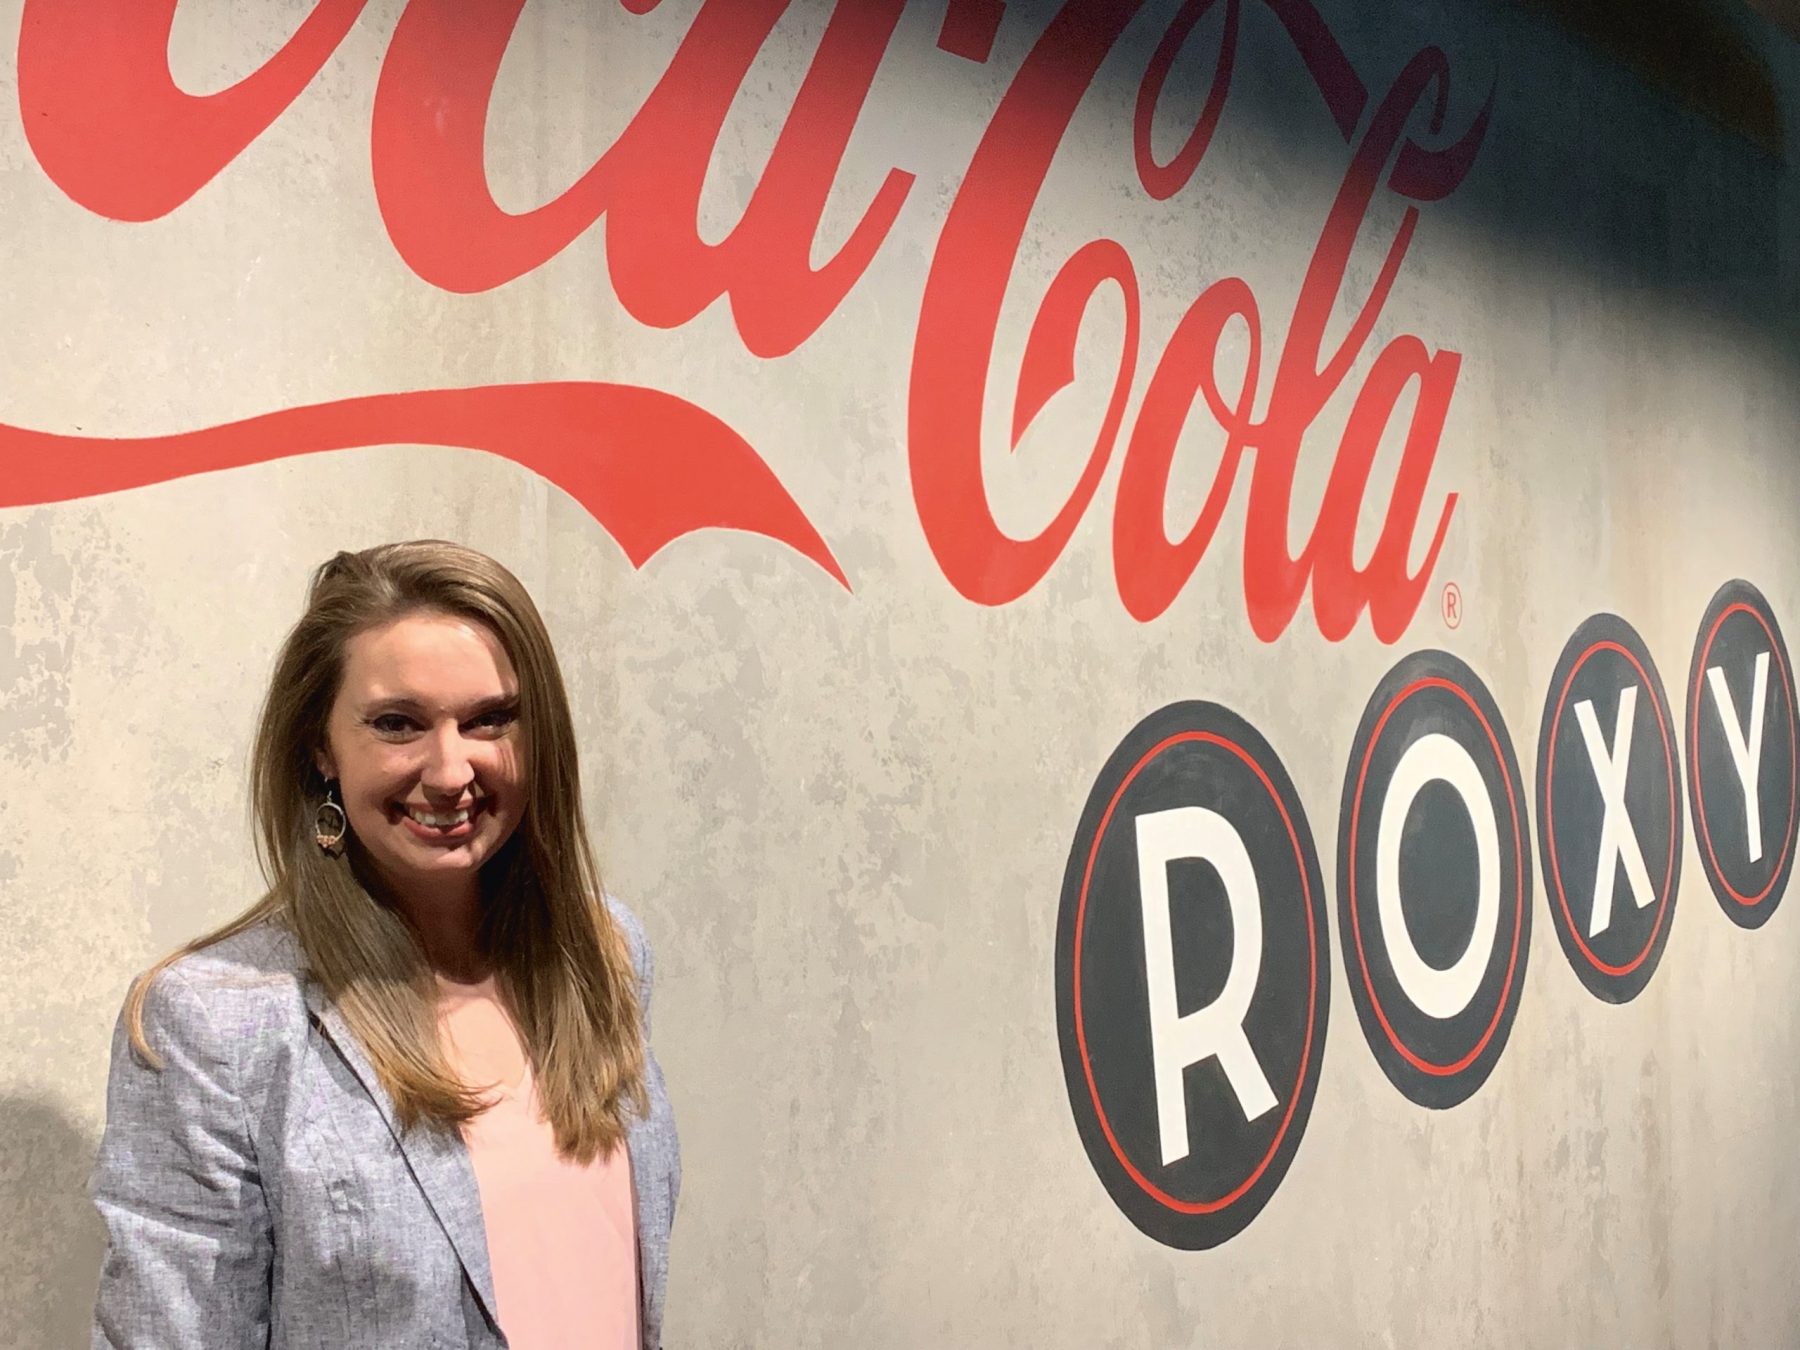 Young man stands next to a wall that says Coca-Cola Roxy